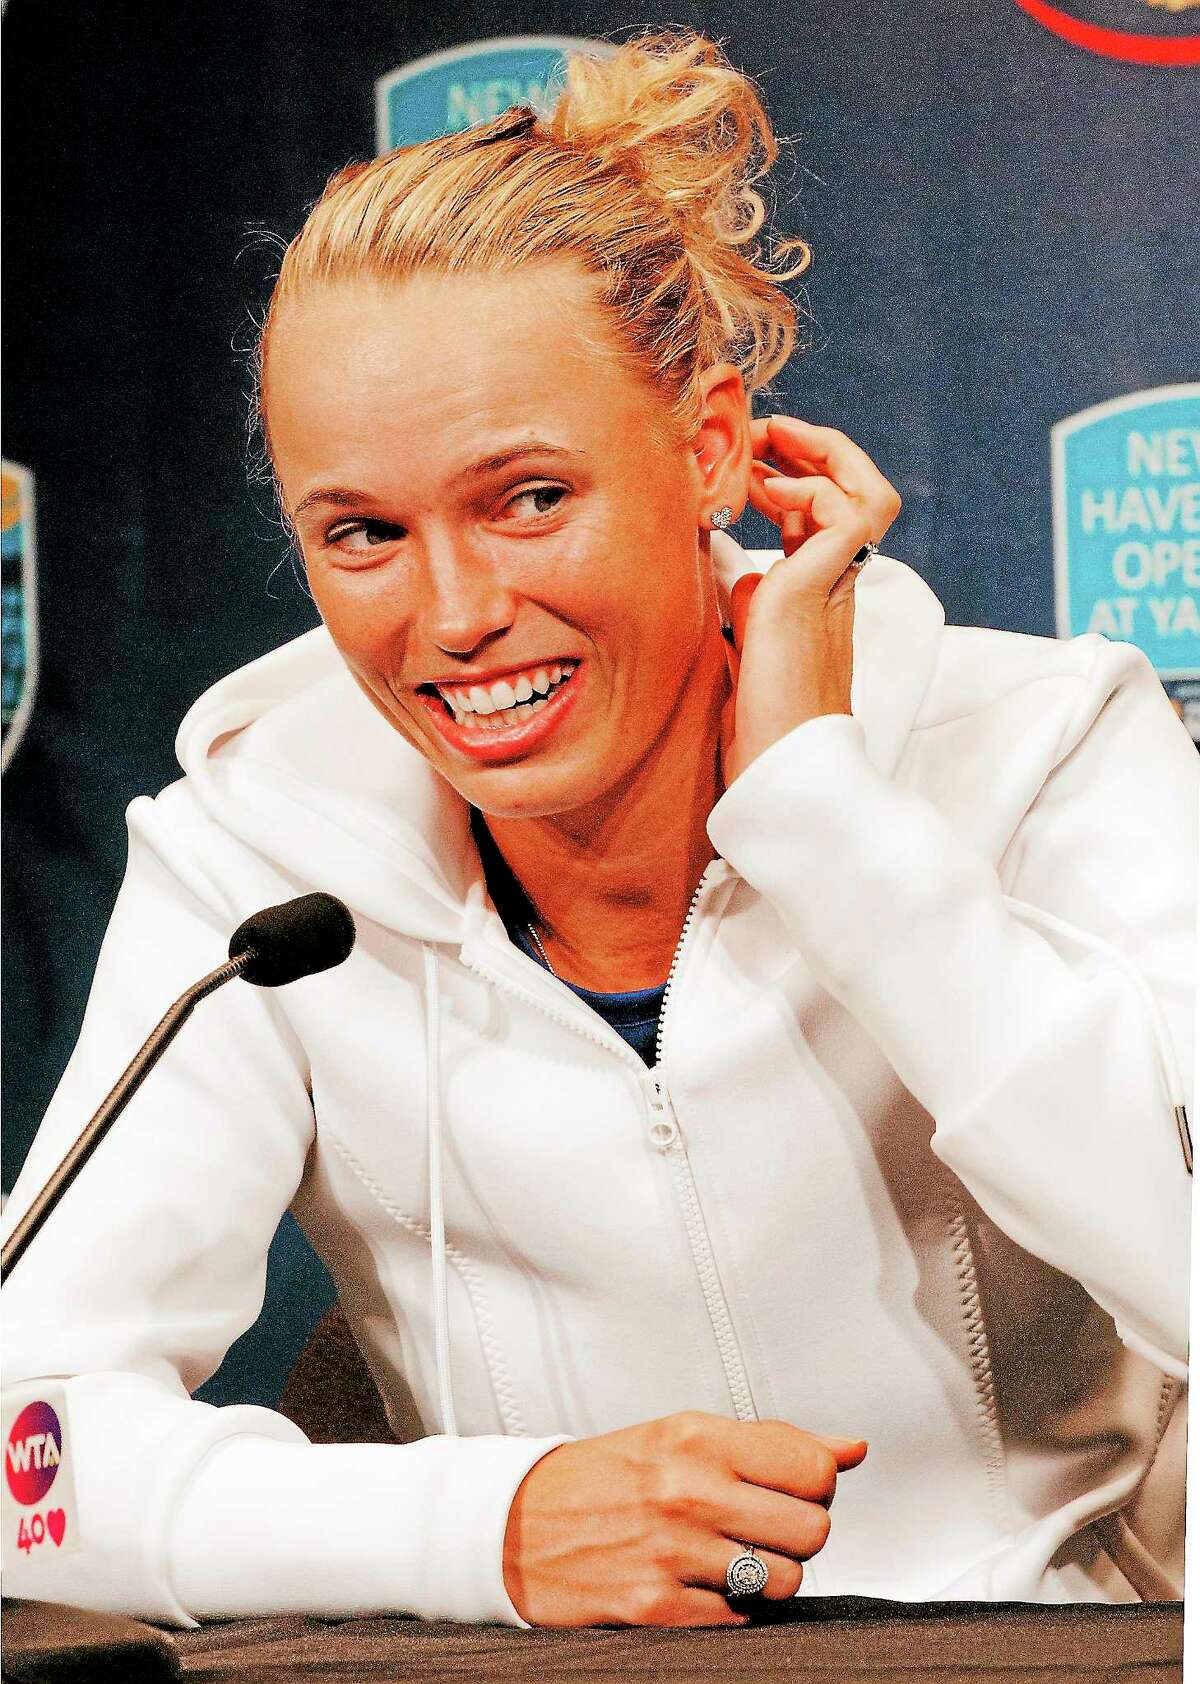 Four-time New Haven Open champion Caroline Wozniacki said New Haven feels like a second home.